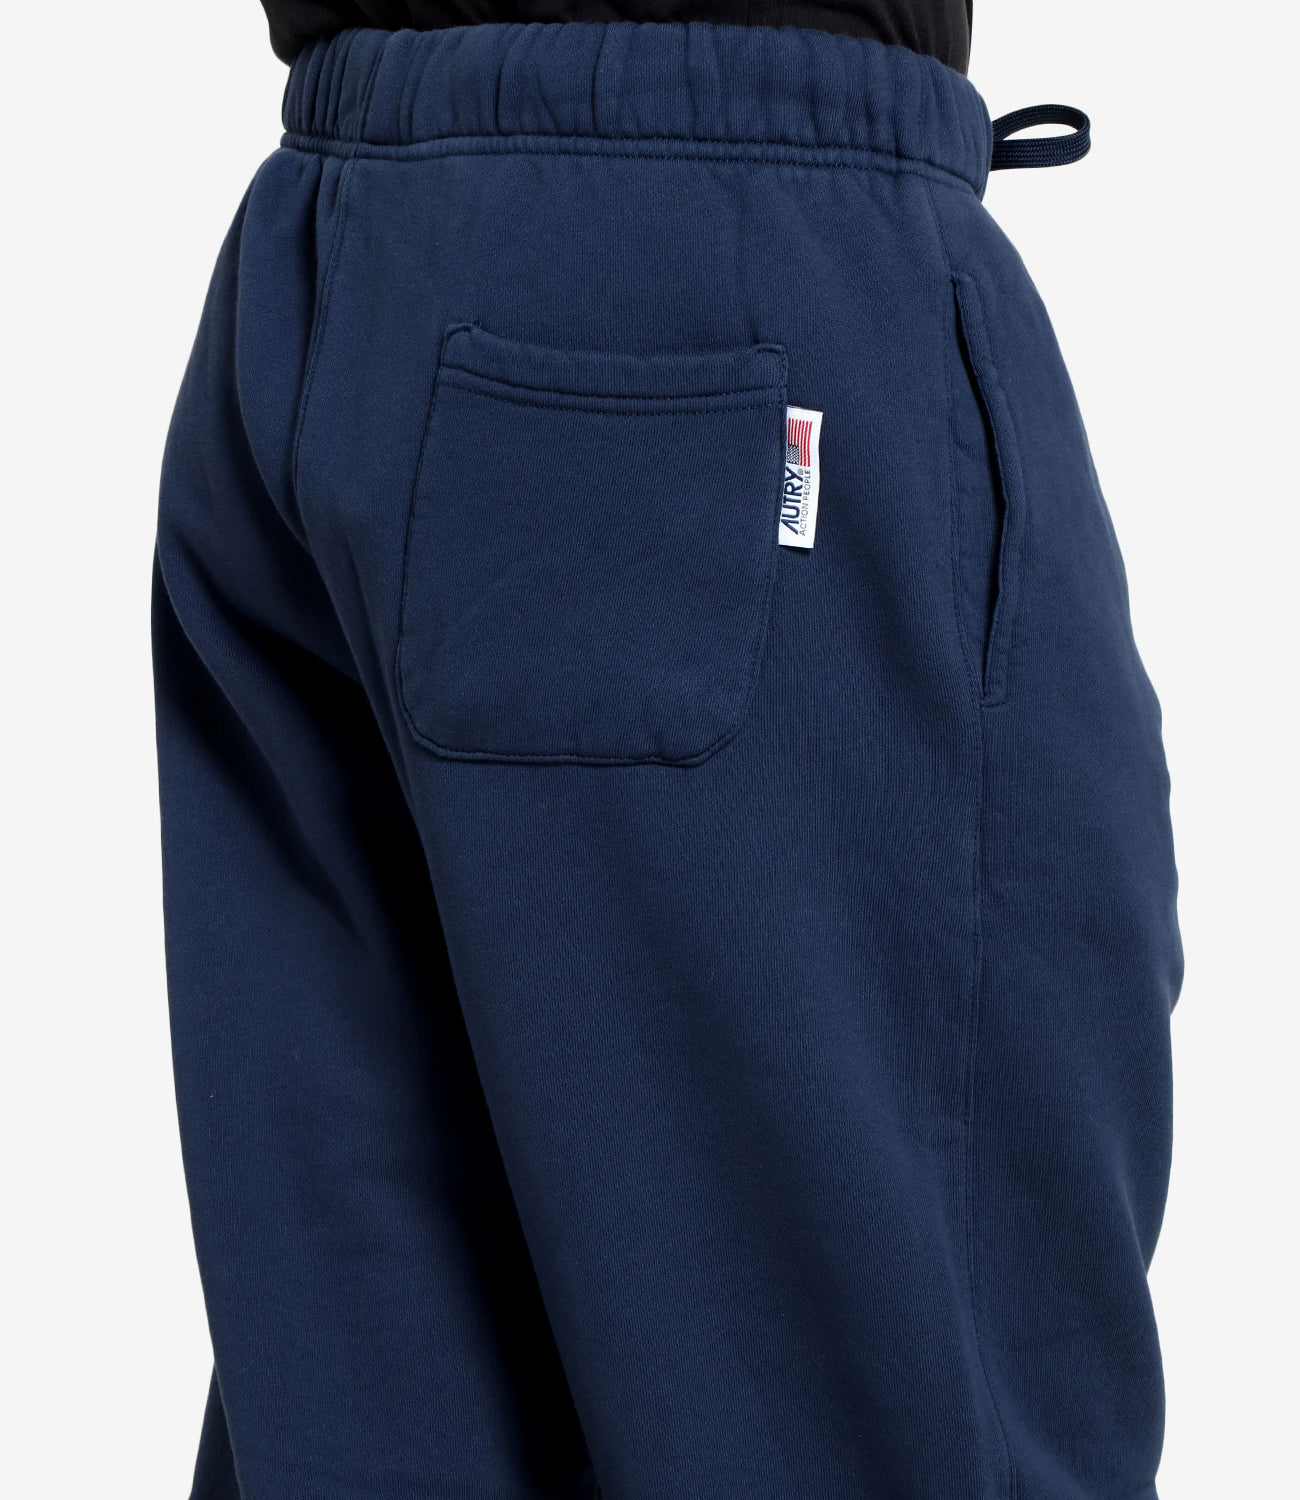 Autry | Iconic Hembro Blue Sports Pant